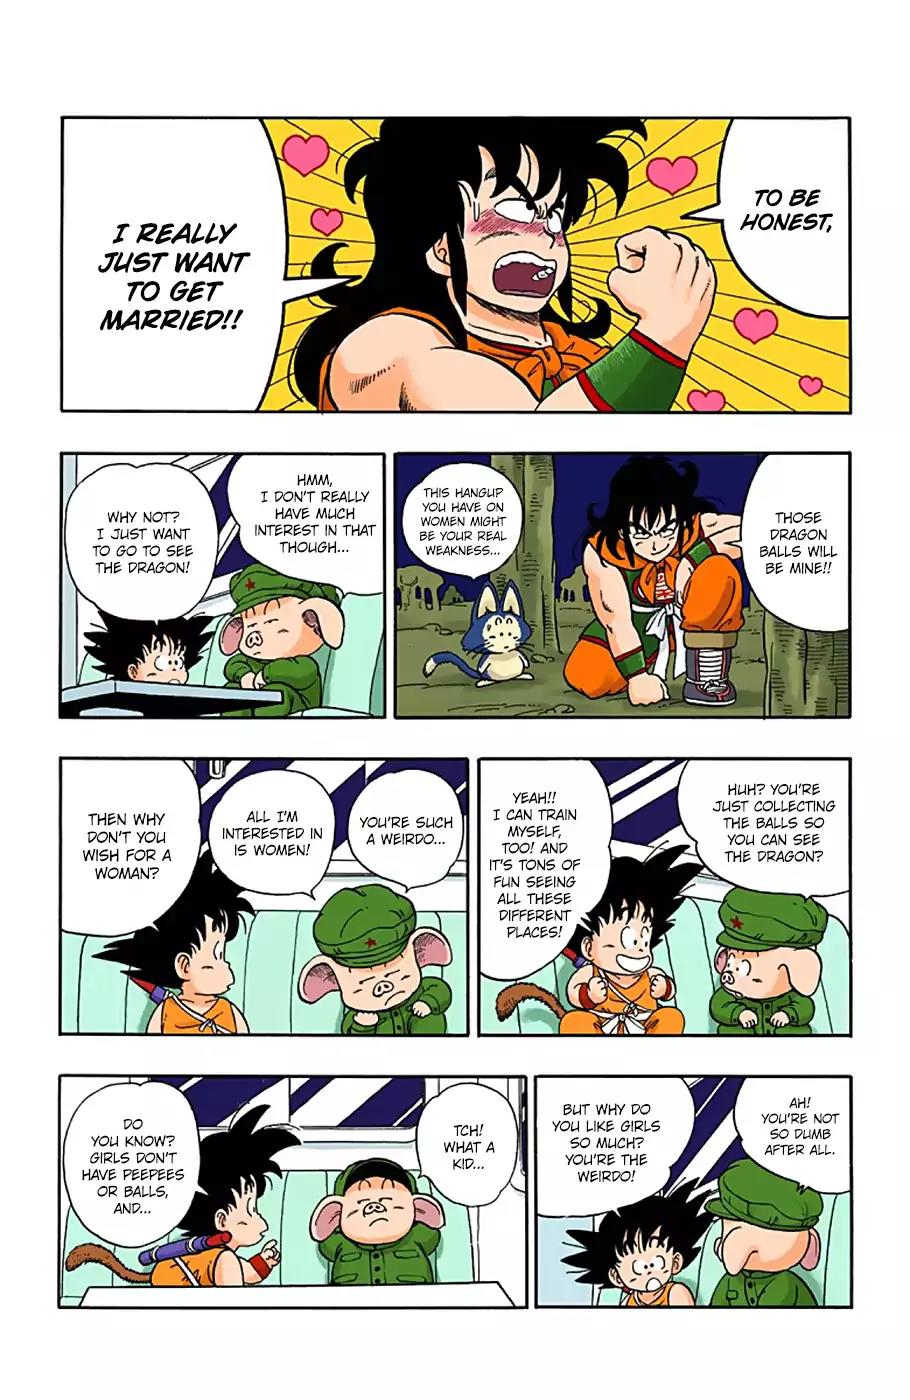 Dragon Ball - Full Color Vol.1 Chapter 9: